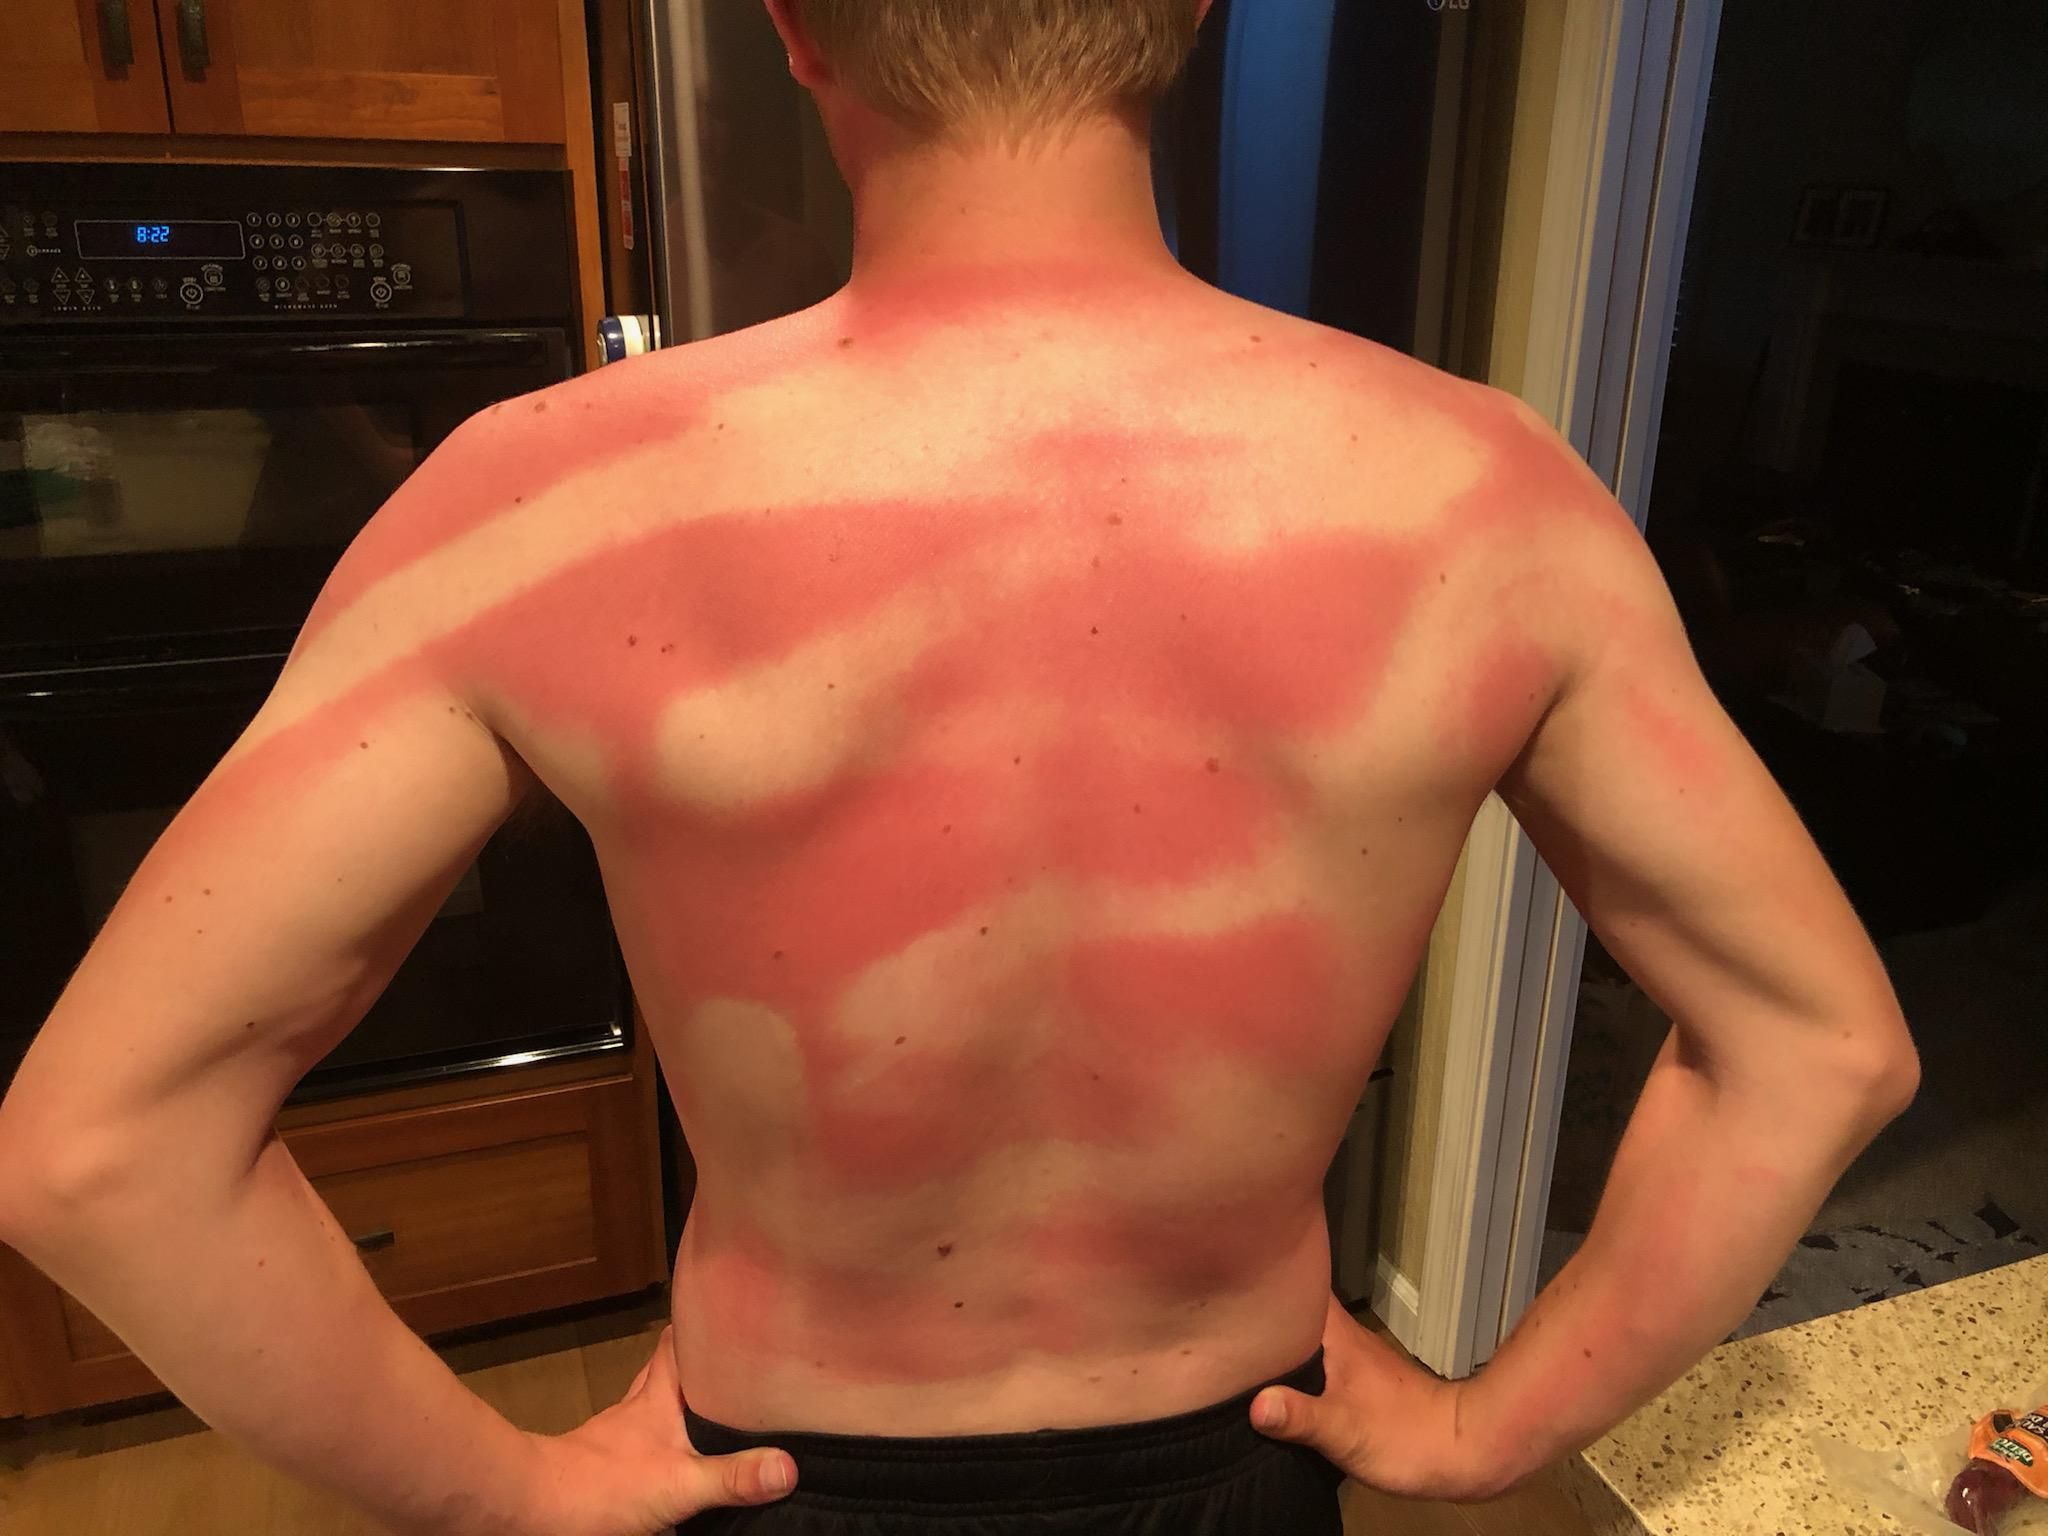 My Wife helped me sunscreen my back at beach day today !!